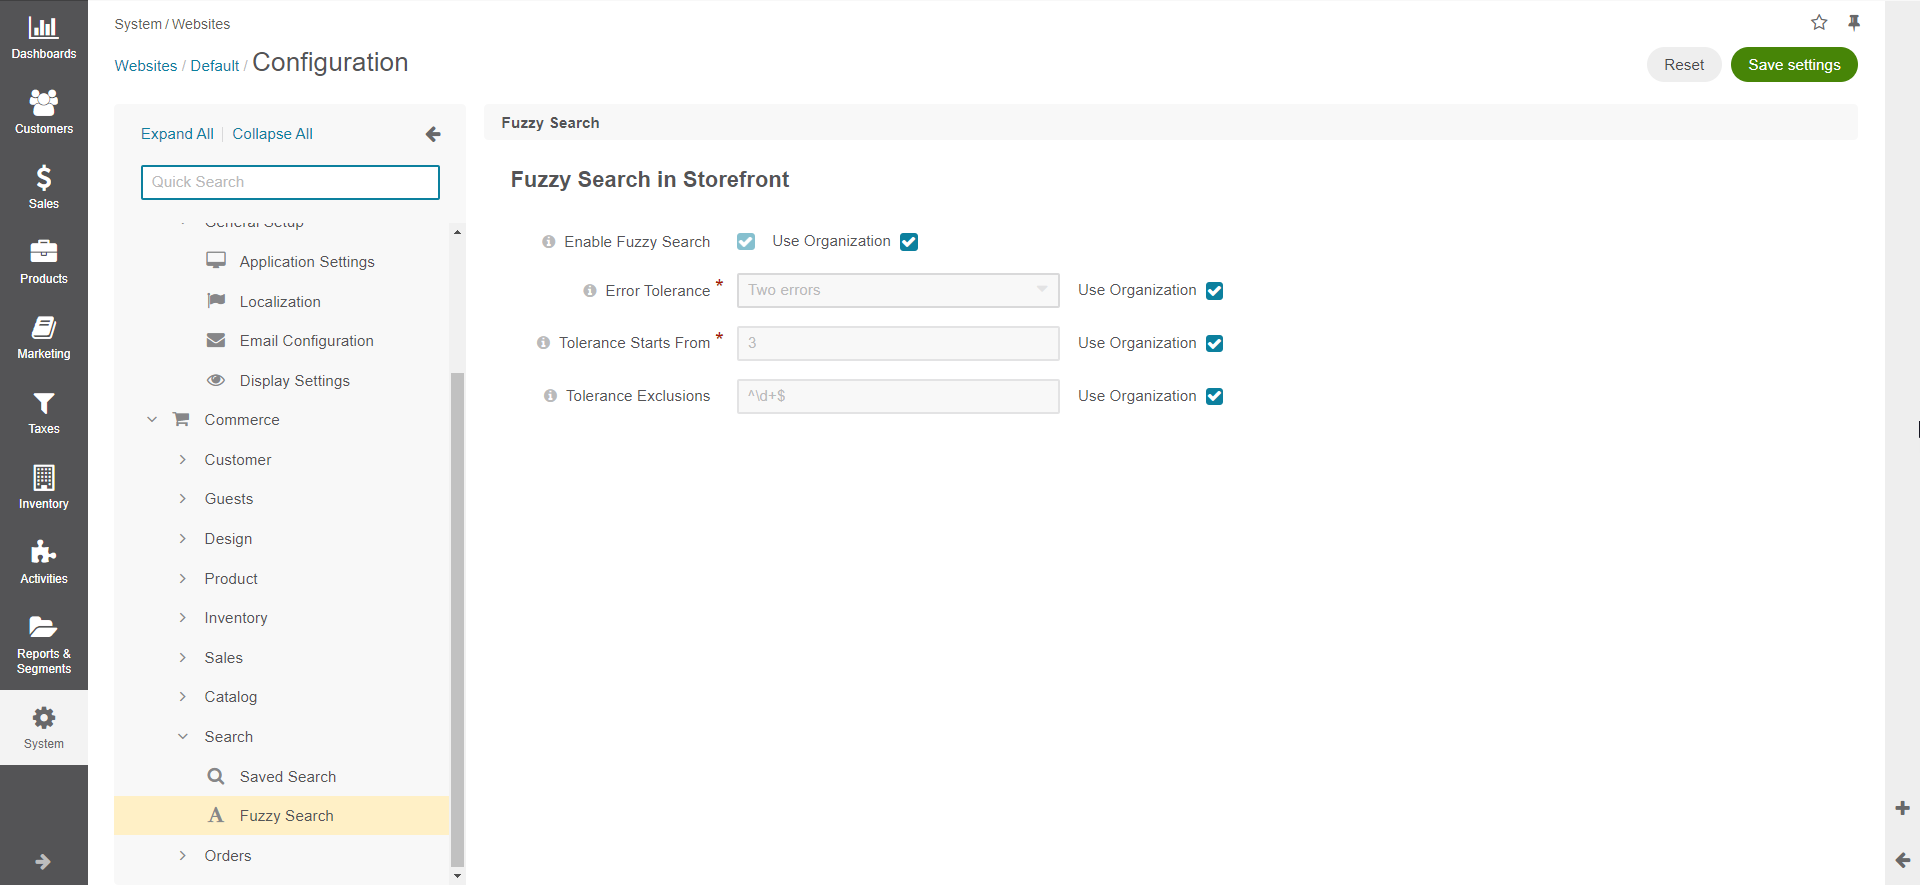 Storefront fuzzy search configuration options on the website level